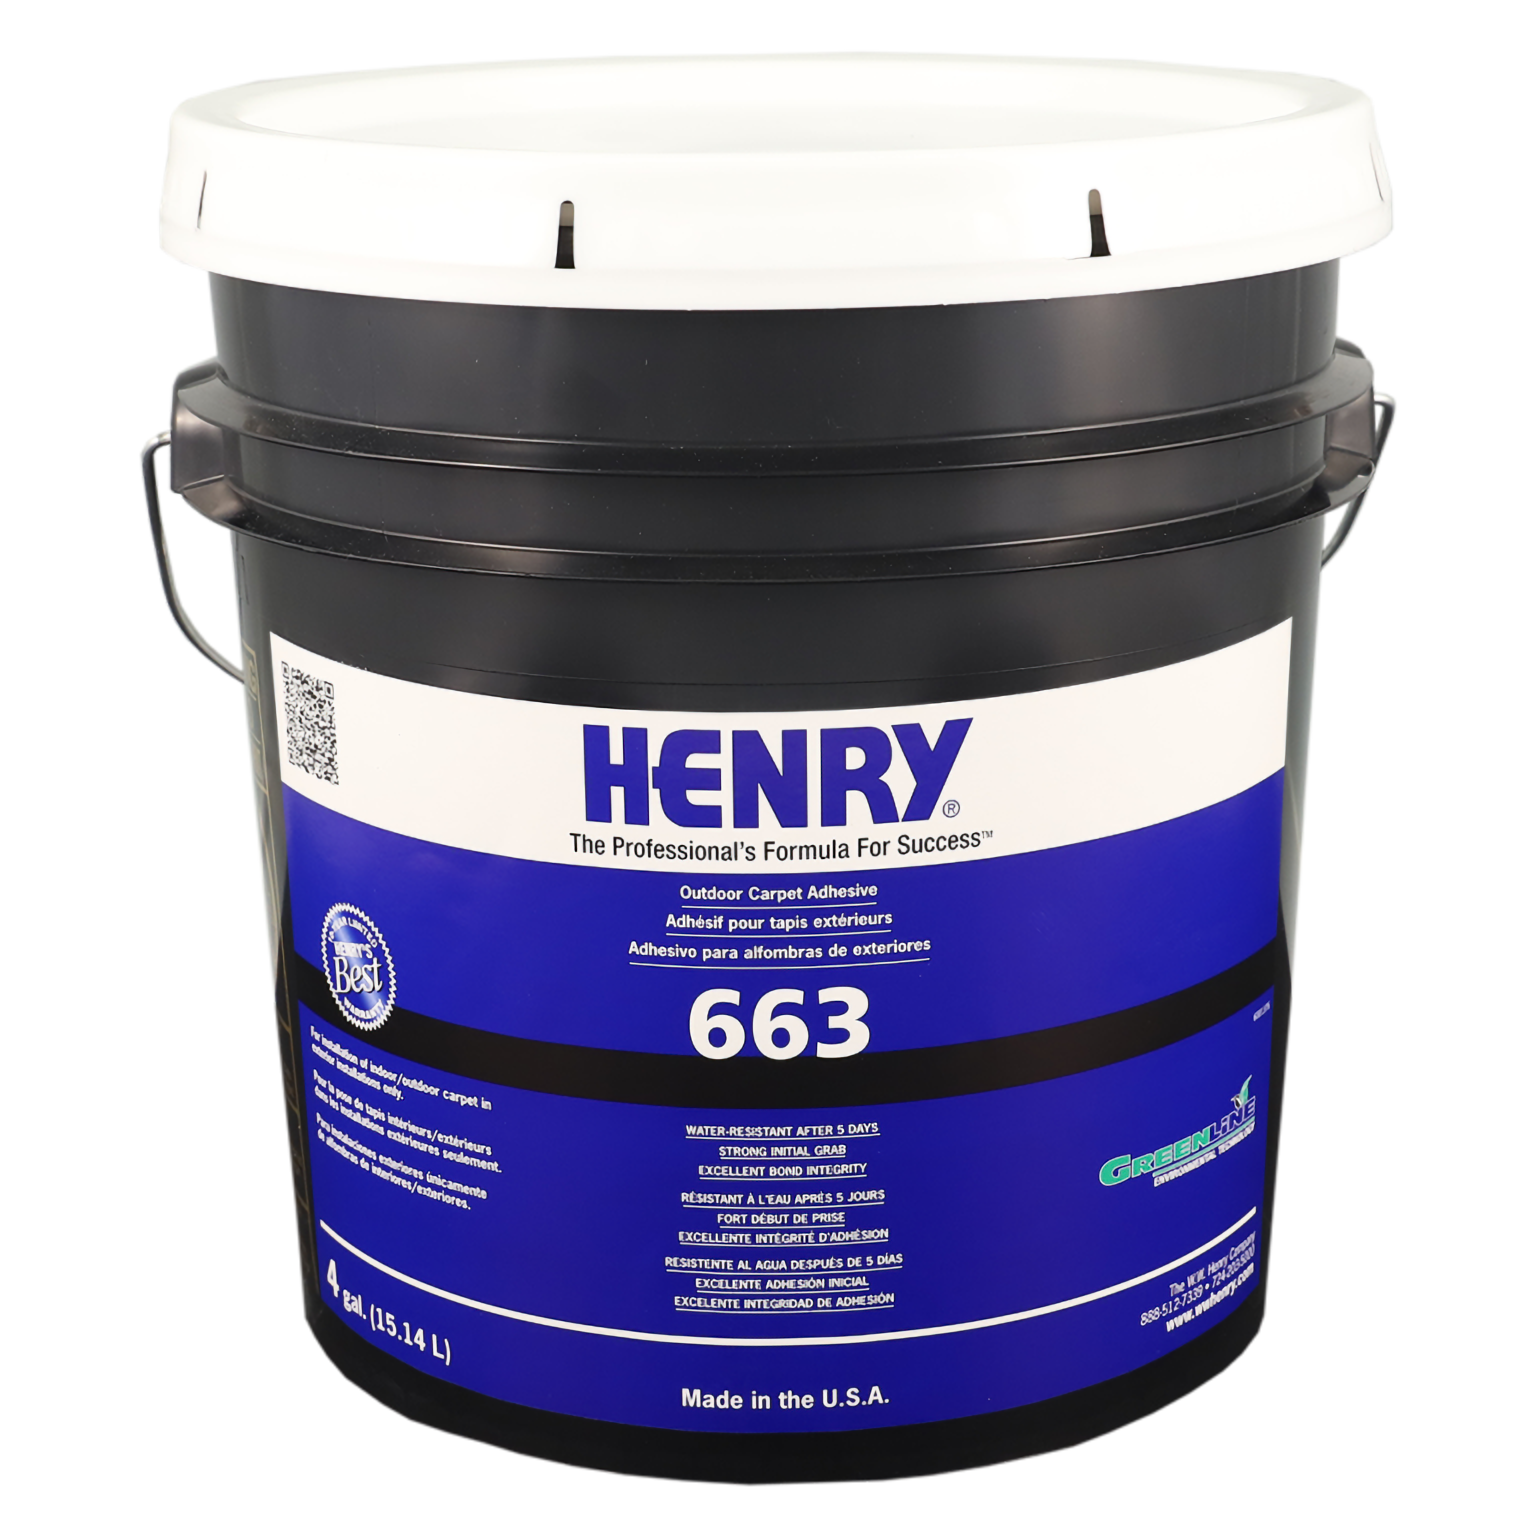 HENRY 663 Outdoor Carpet Adhesive